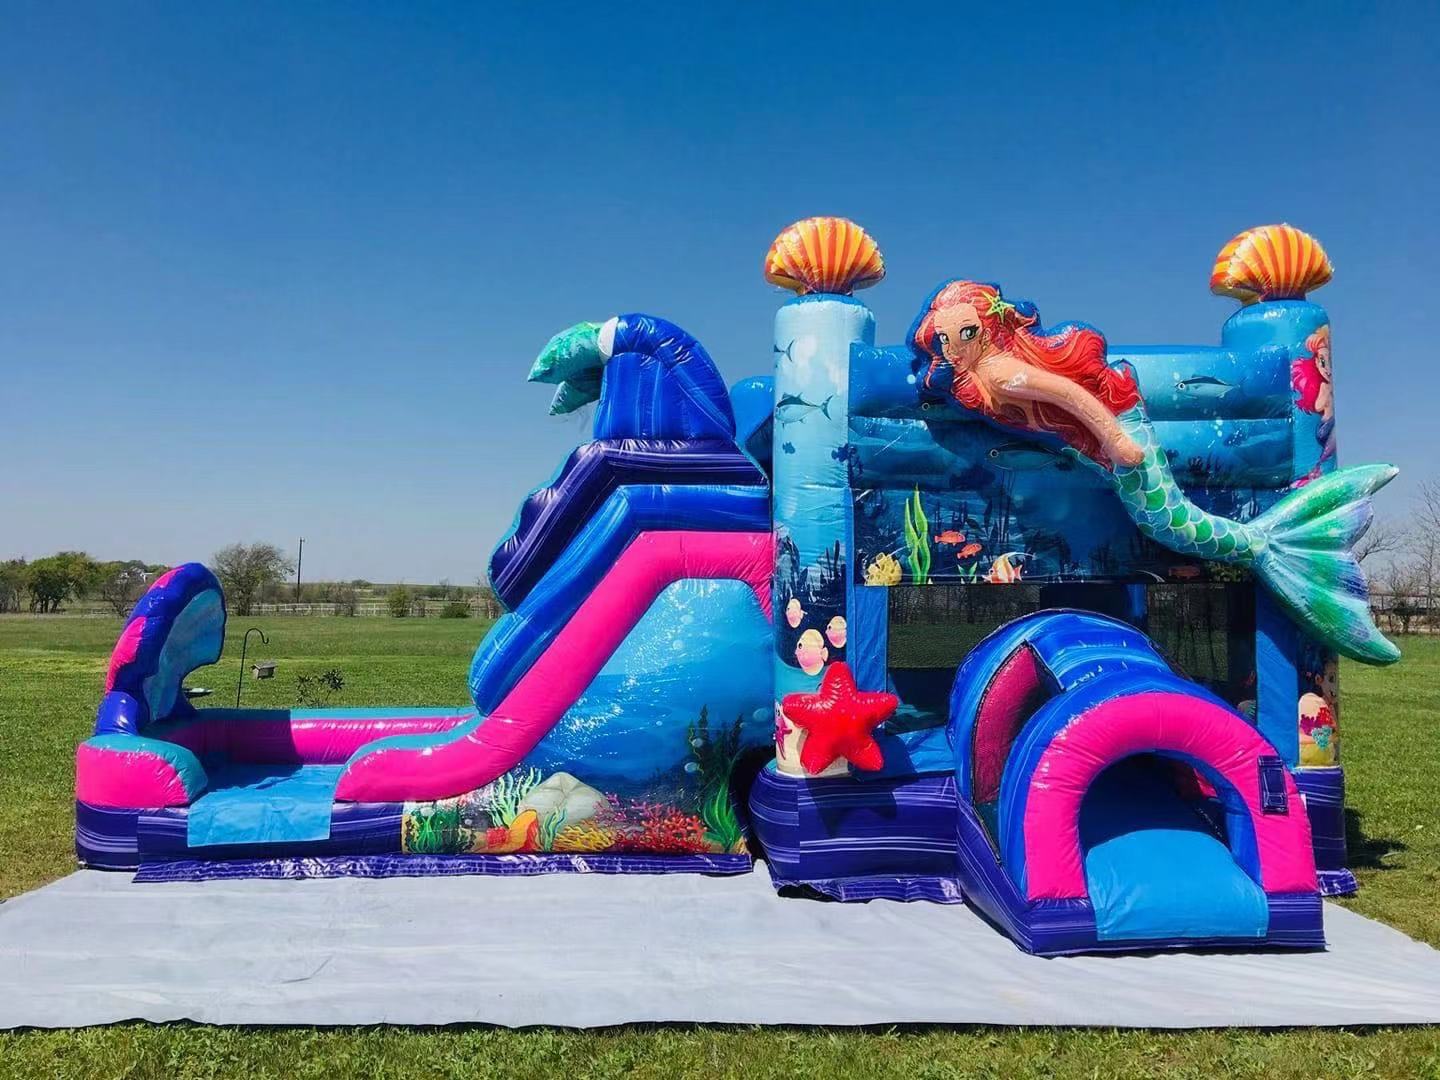 Mermaid Wet/Dry Bounce House Combos Rentals, Bolingbrook, IL